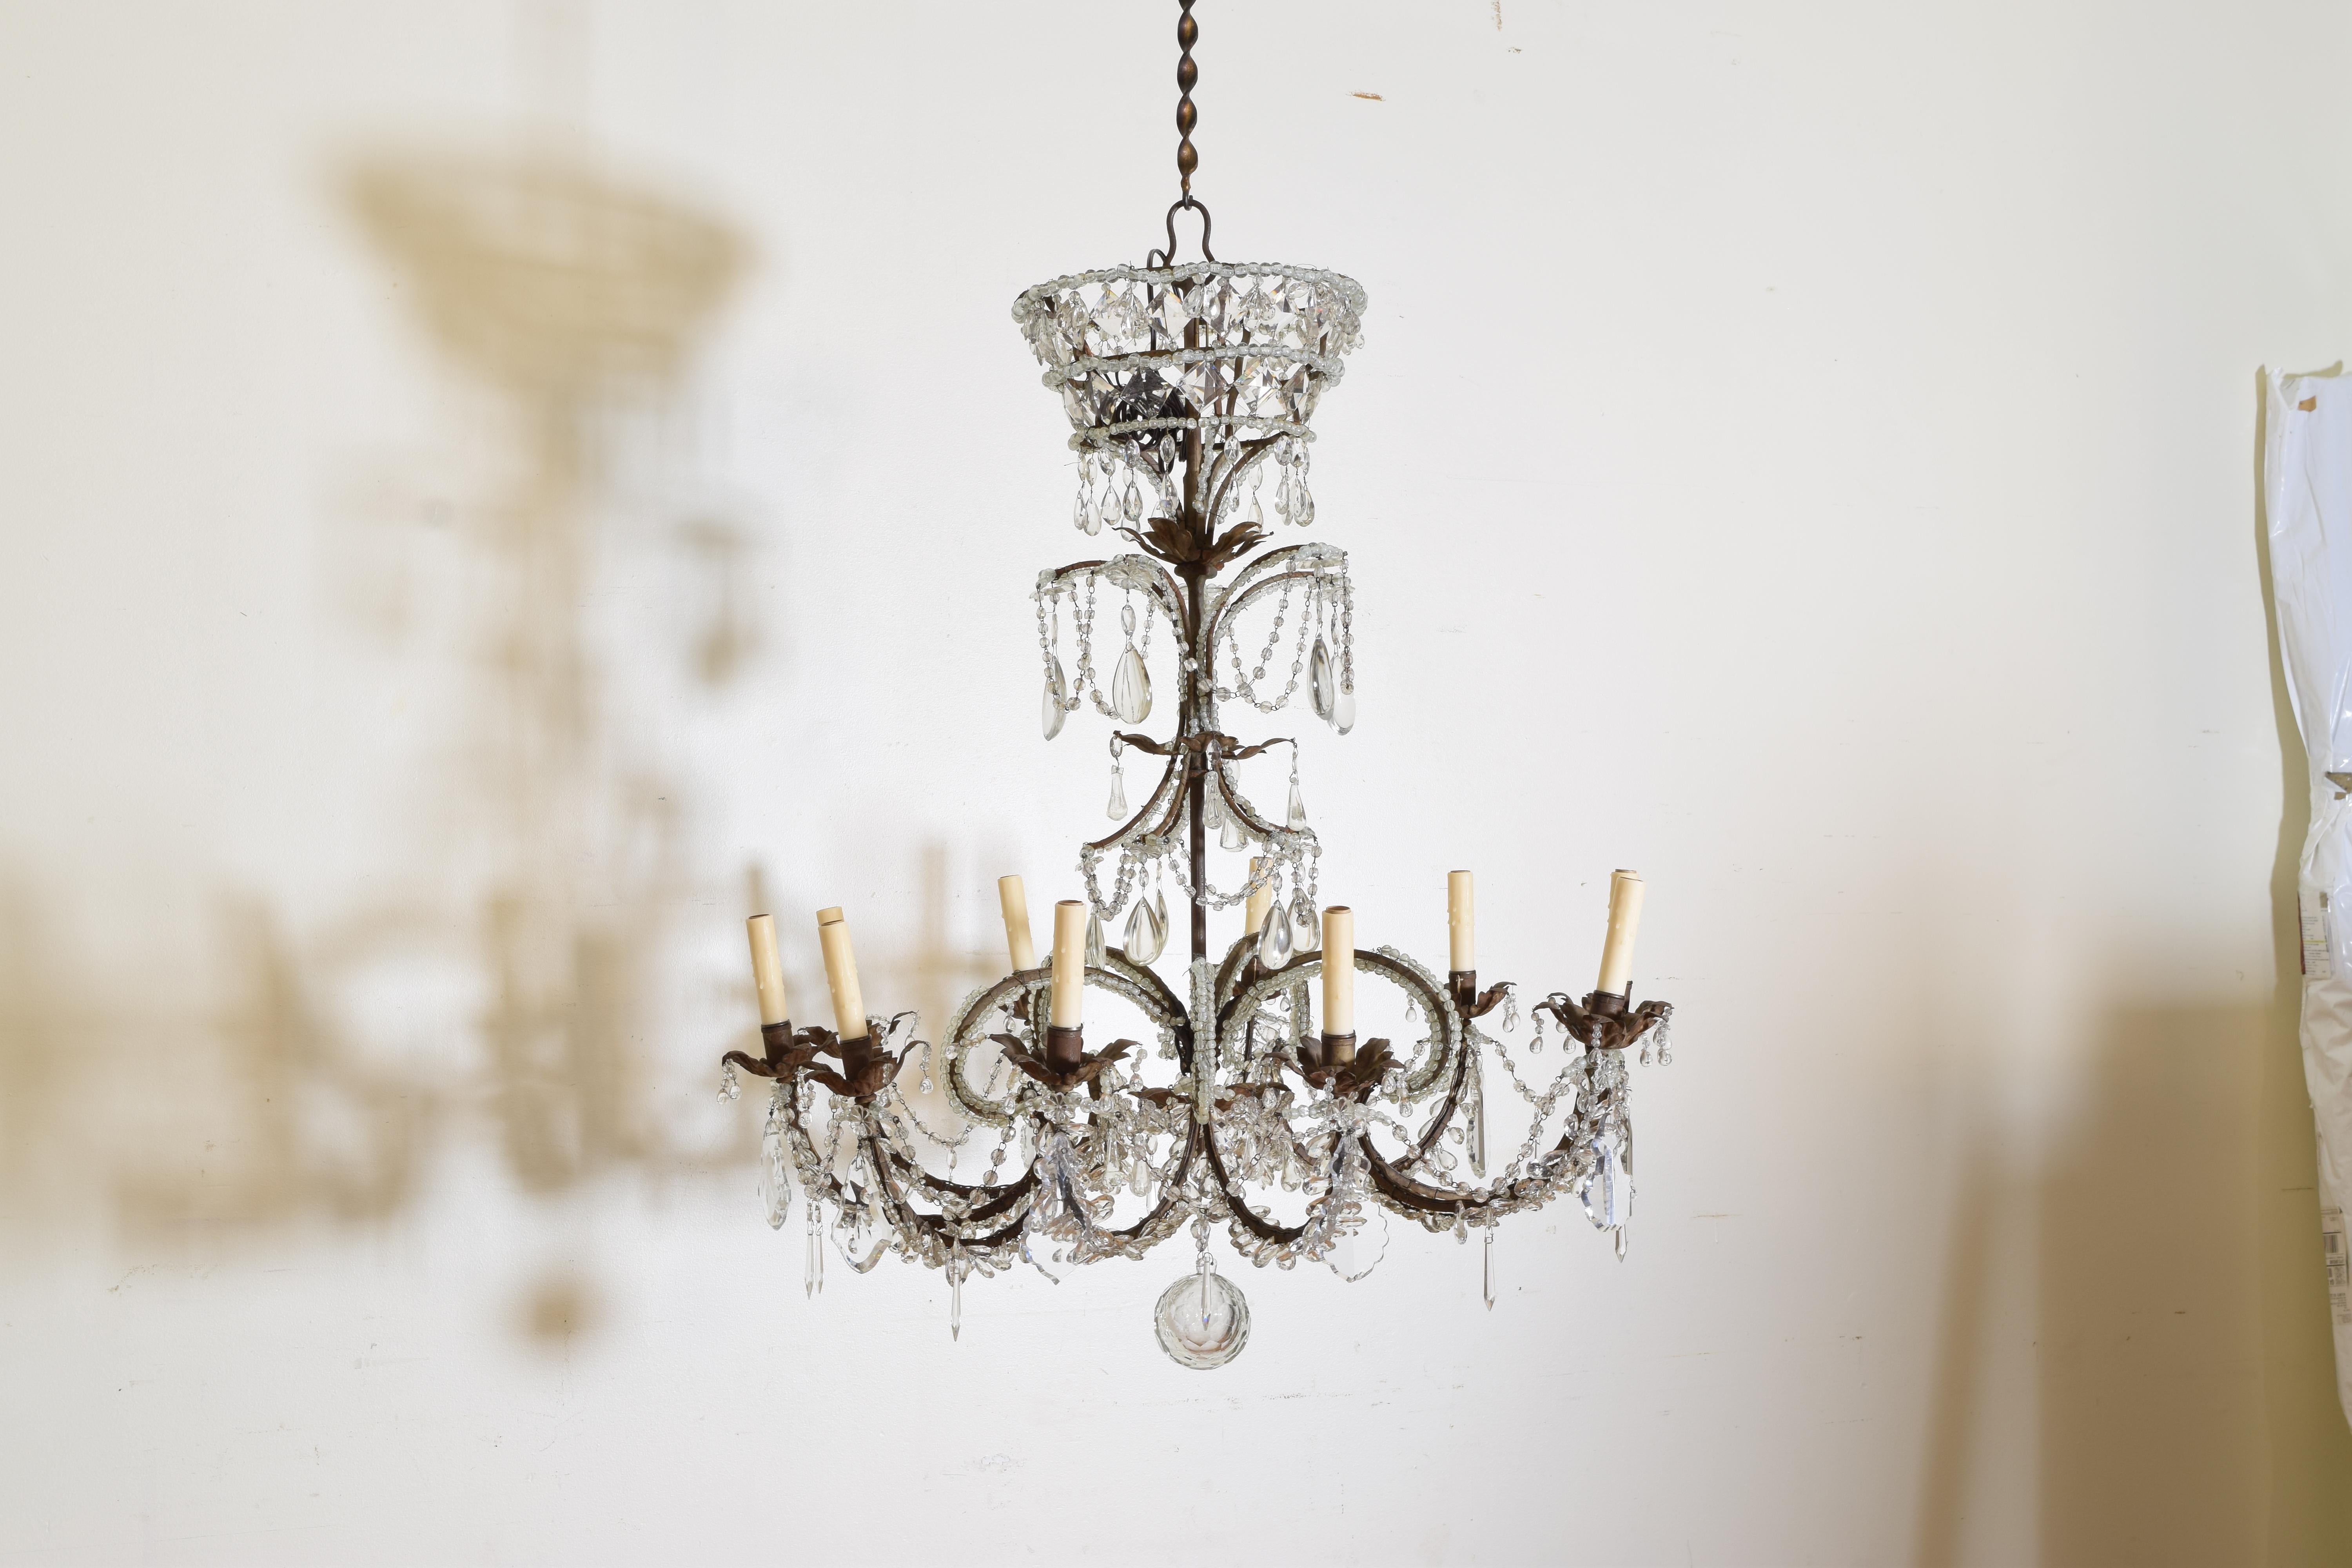 Uniquely crafted in the Rococo style this chandelier is constructed of iron with scrolled arms with metal bobeches retaining some gilding, the scrolled arms fitted with glass prisms and connected by glass bead chains, the top of graduated crown or